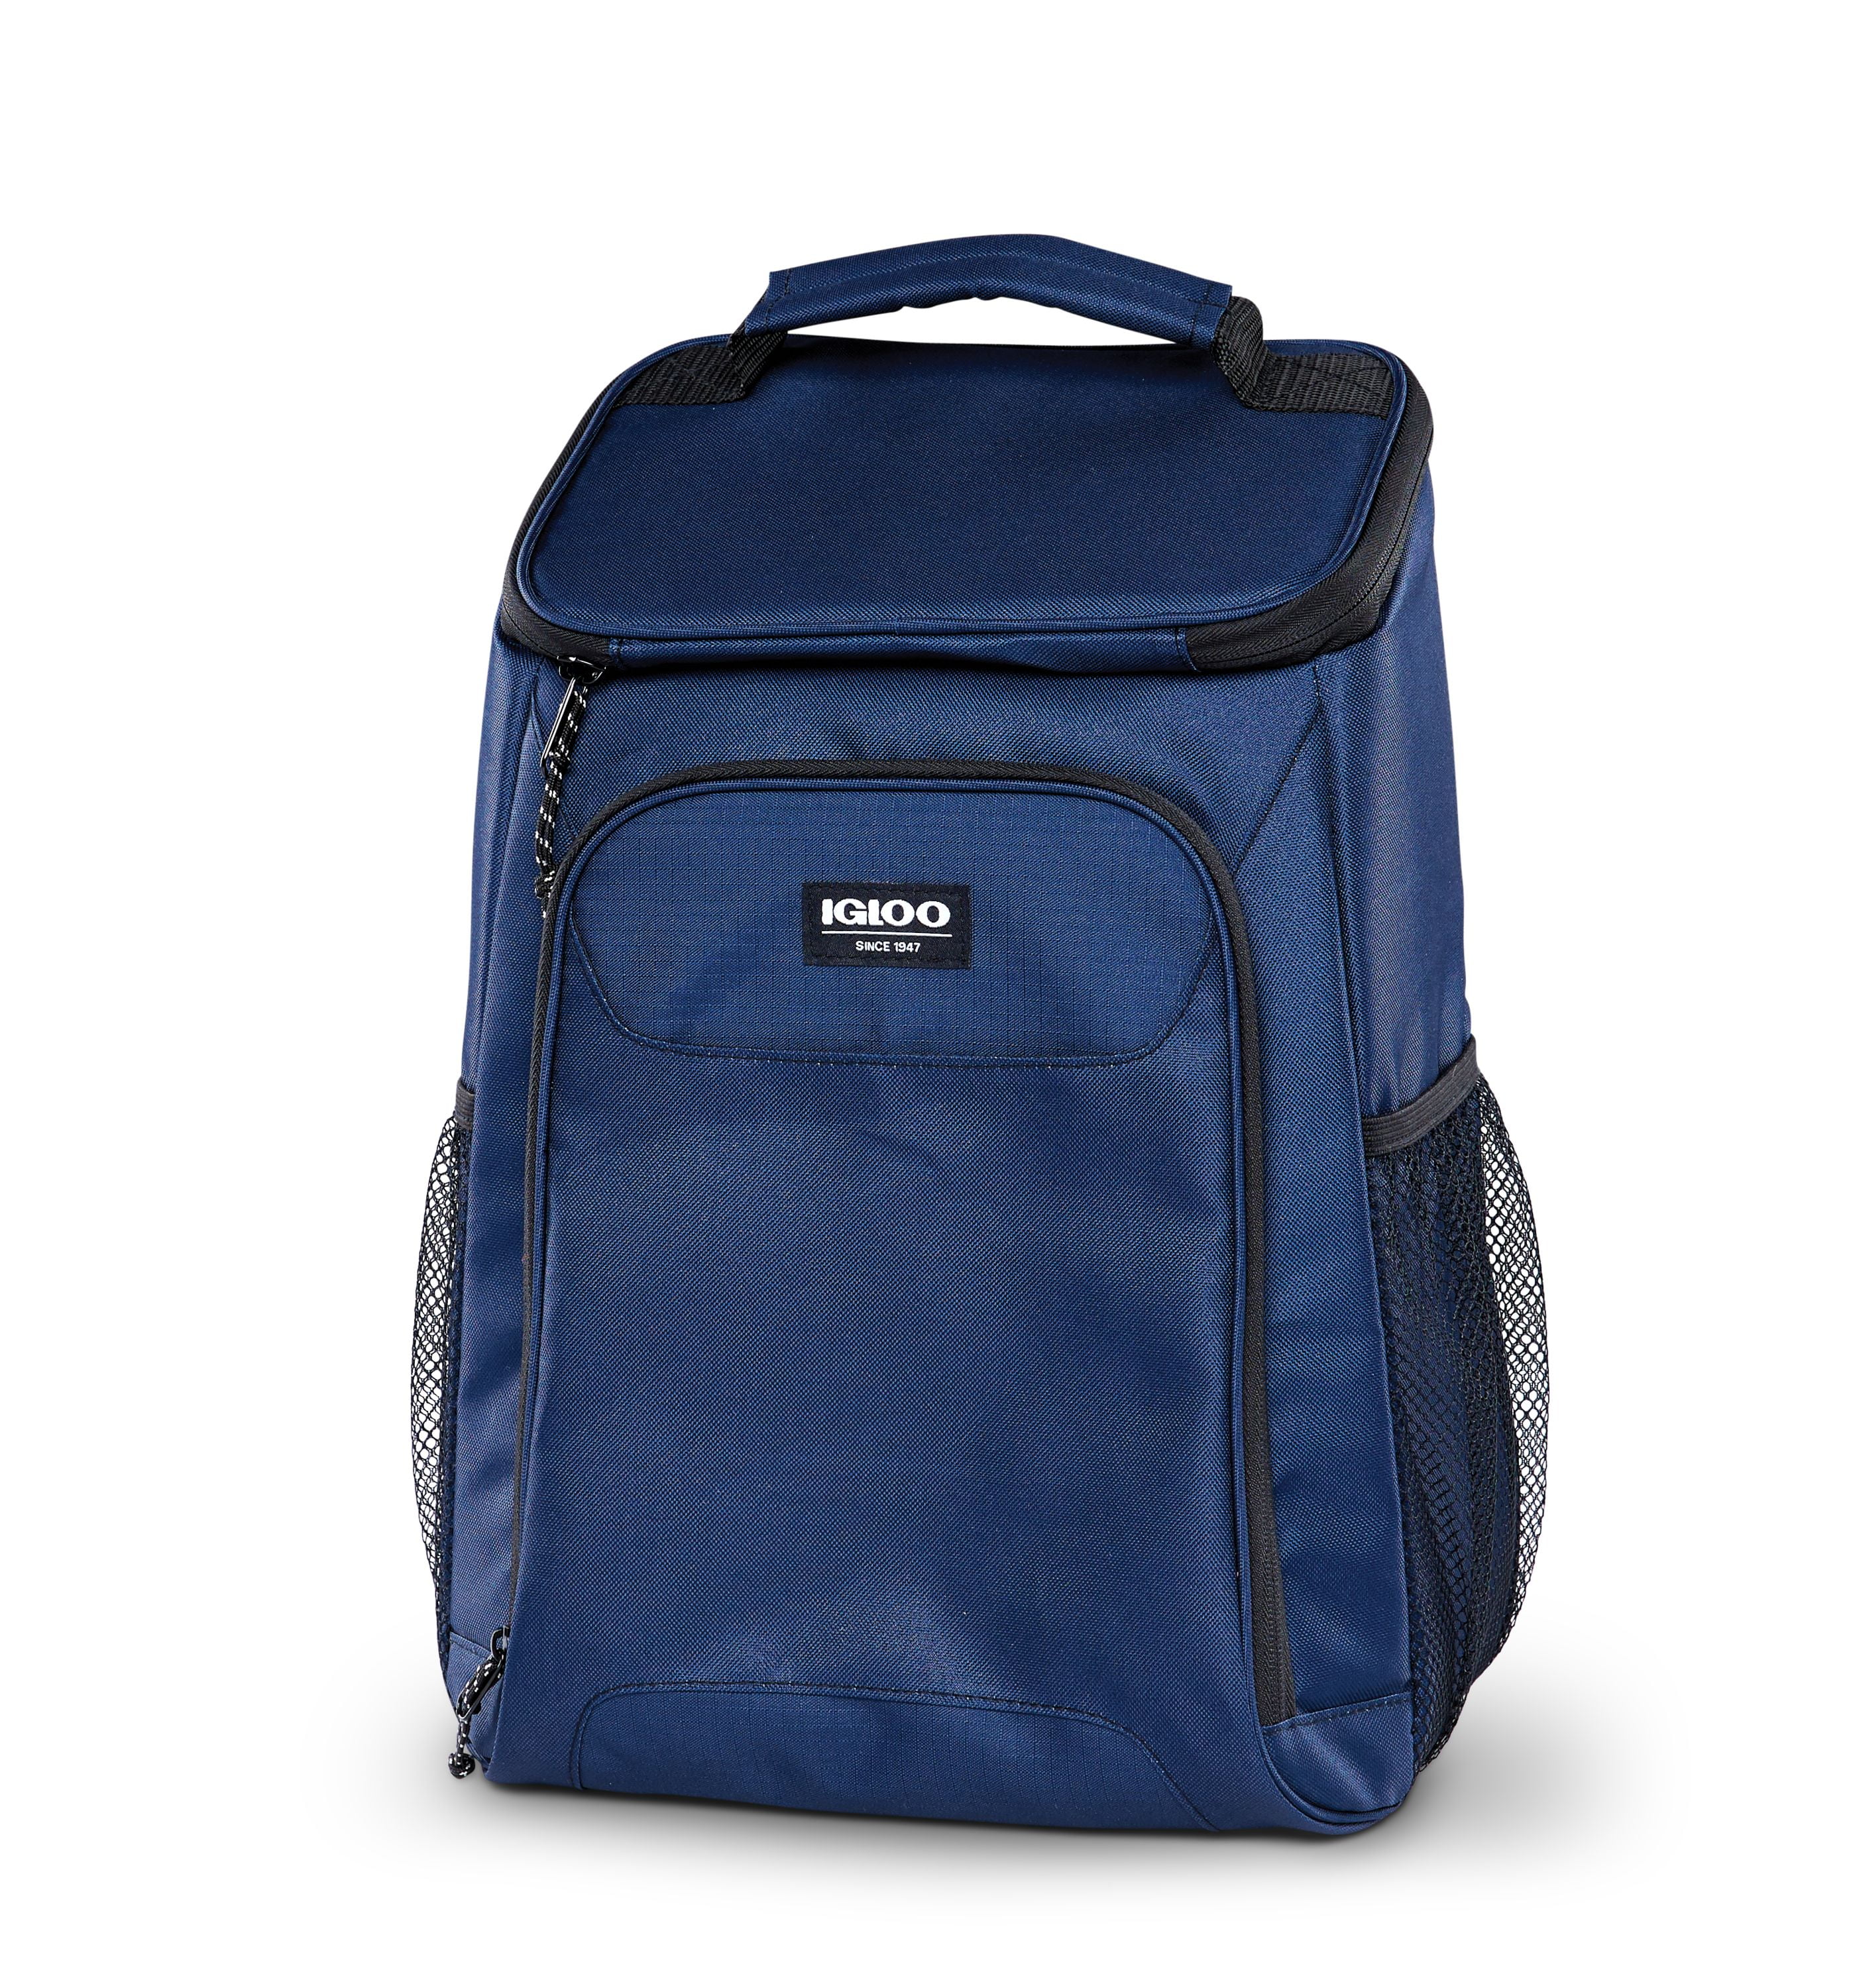 Igloo Top Grip Backpack 24 Can Soft-Sided Cooler - Navy